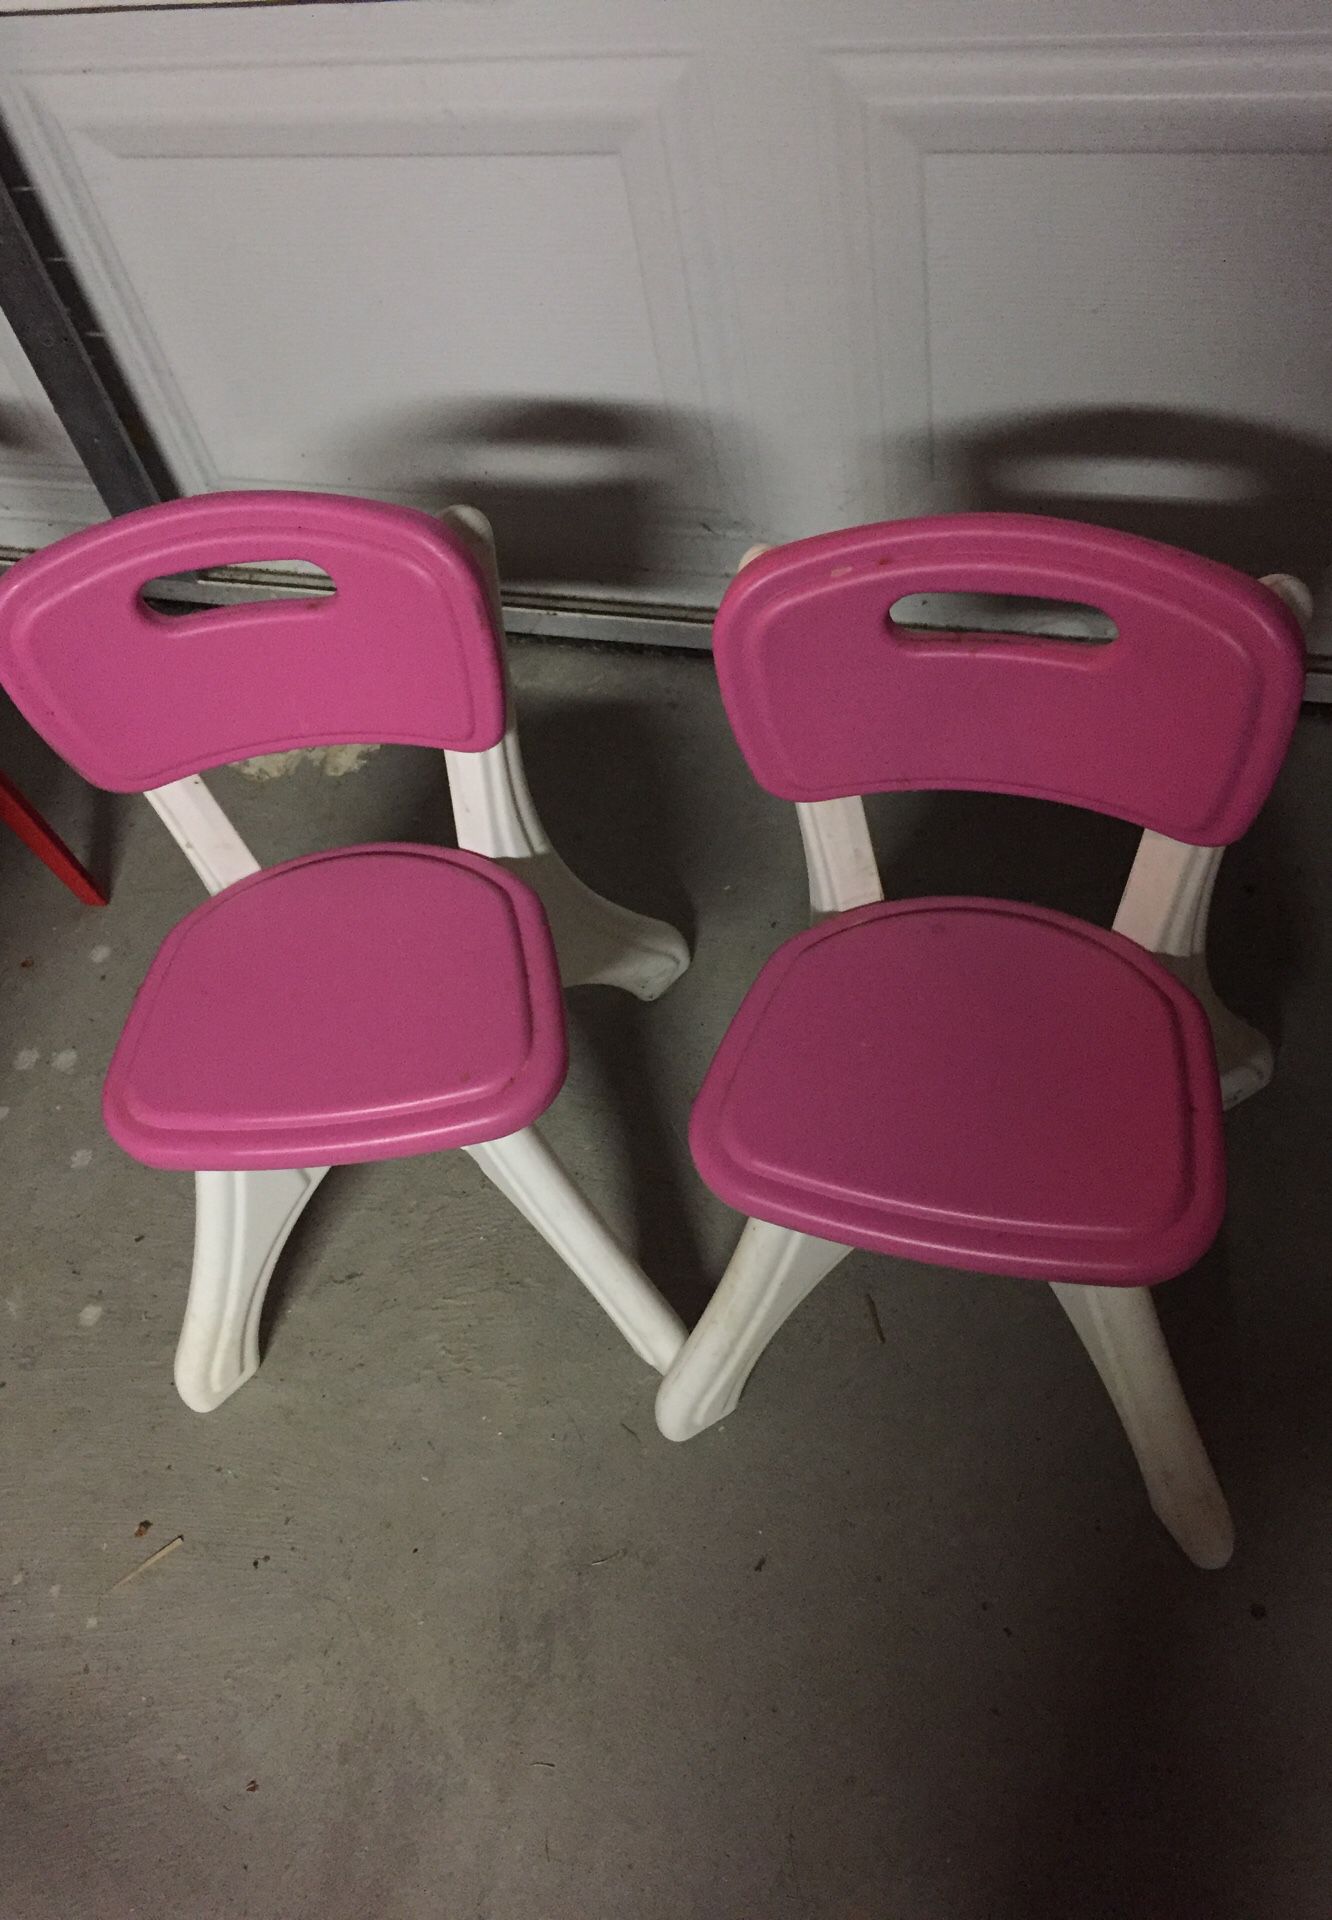 Two pink plastic baby, kids chair 2-3 years old up to 75 lbs